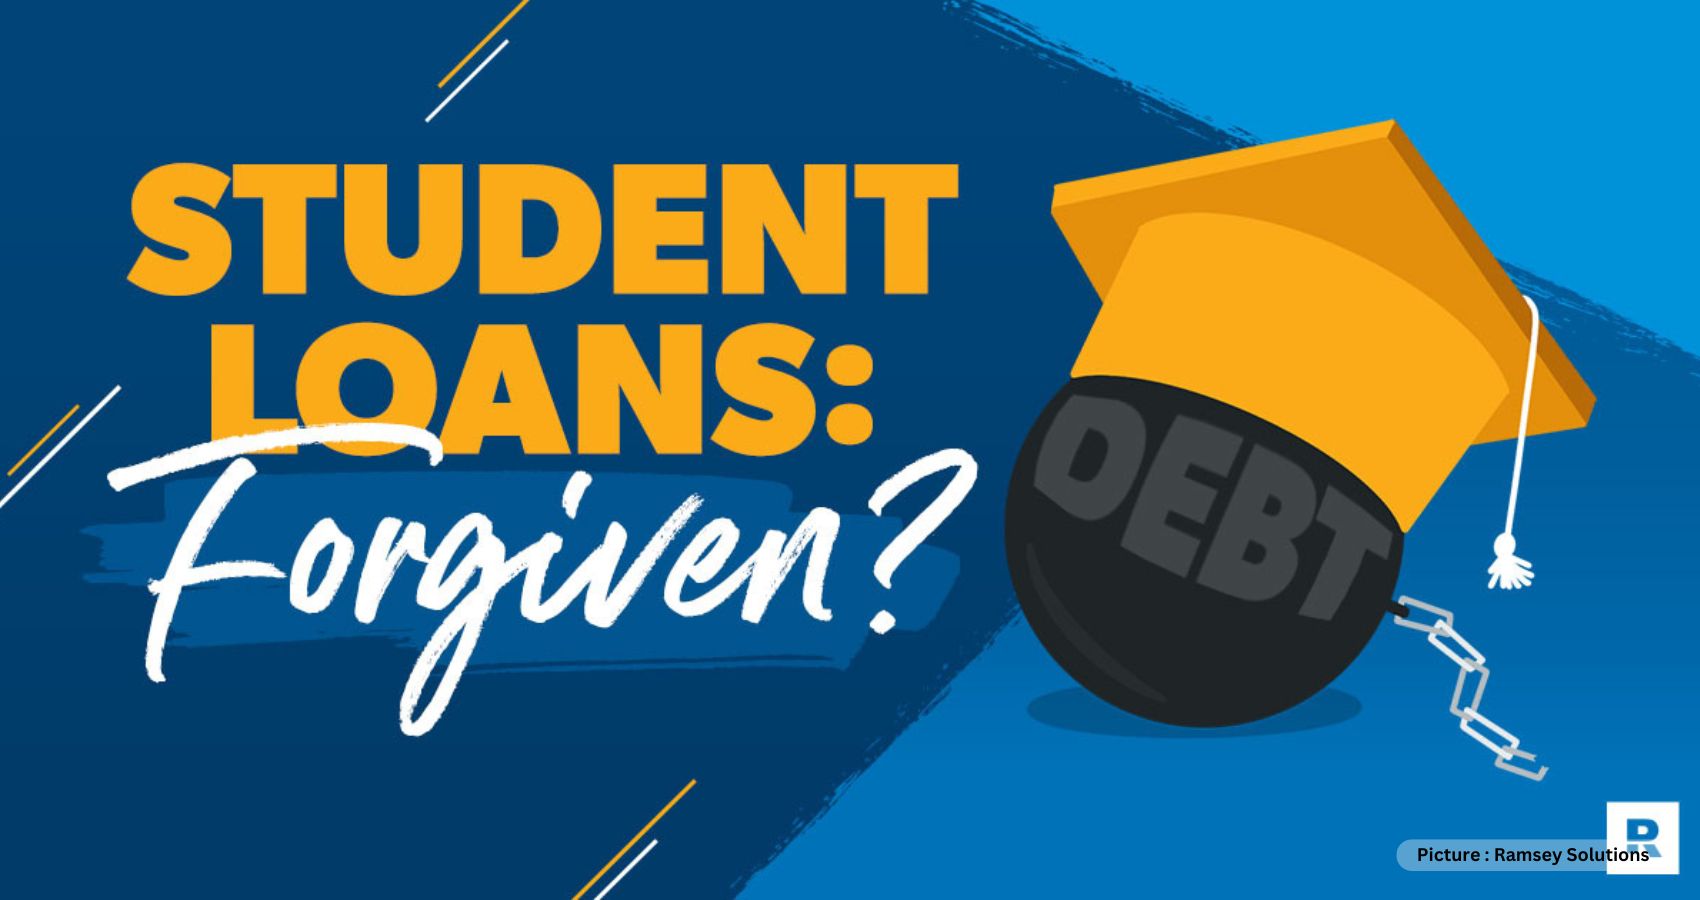 Student Loan Repayments Set to Resume with Potential Debt Forgiveness, New Repayment Plan, and Loan Servicer Changes